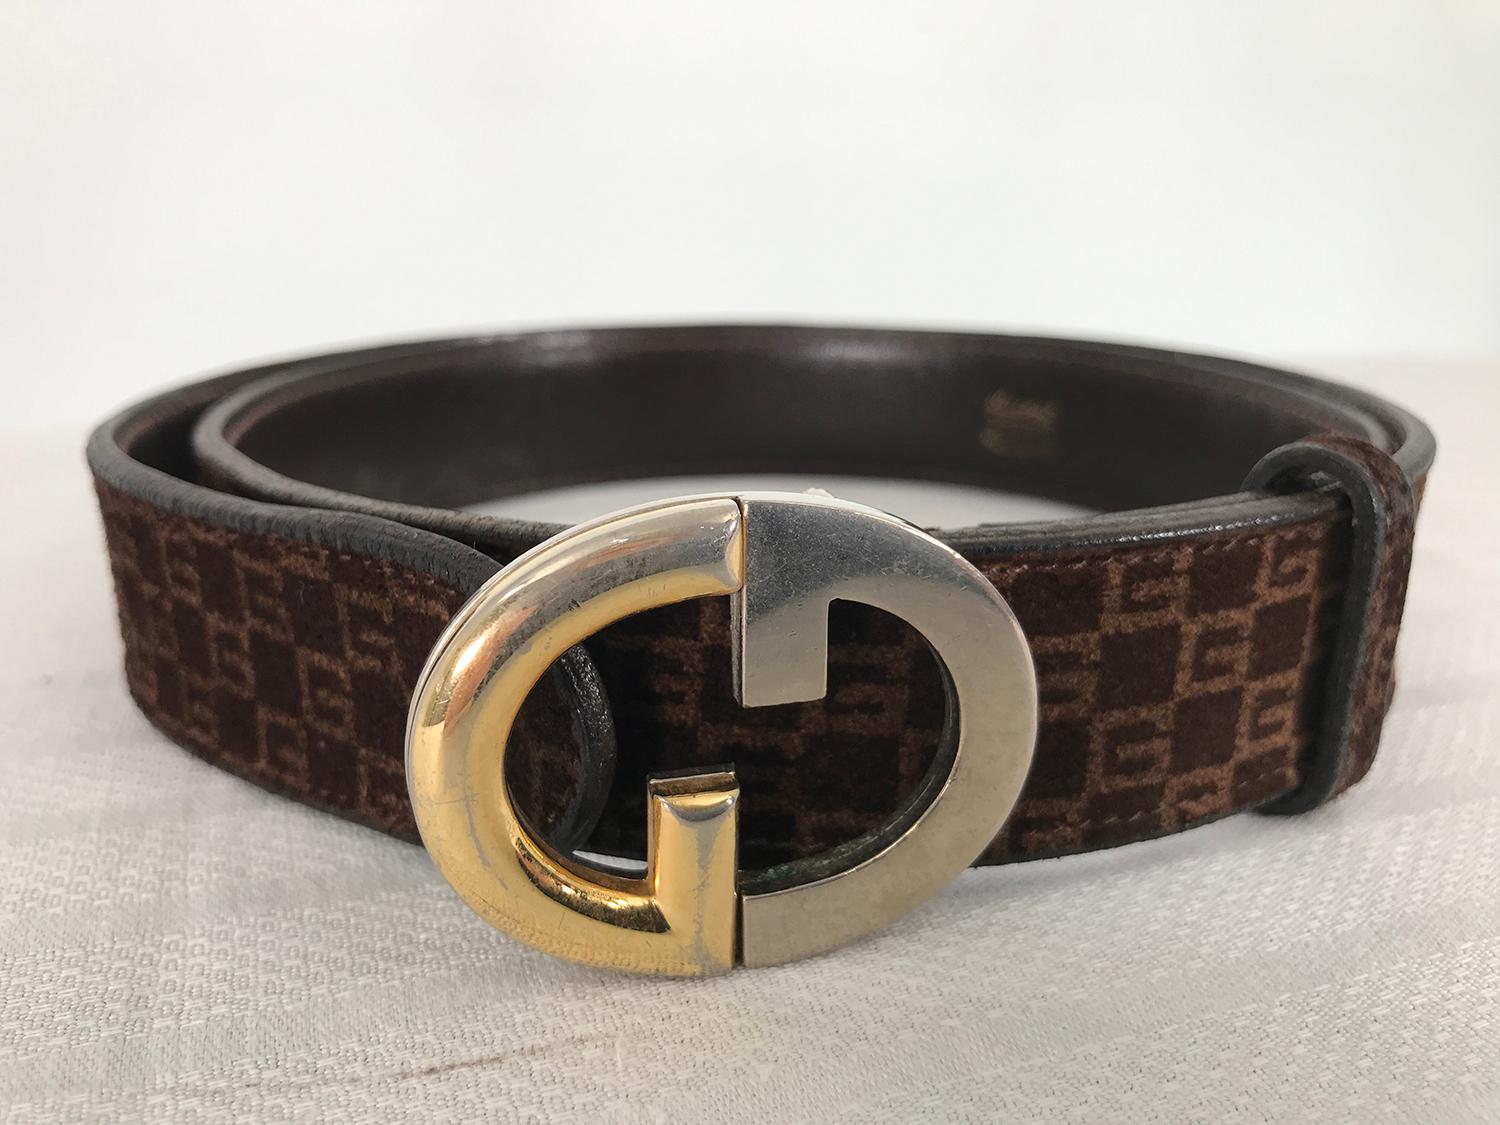 G Gucci original brown suede logo belt strap with the oval G in gold and silver metal from the 1970s. This buckle can be changed to another strap of the same size. Some light scratching to the buckle, light wear. Marked size 85EU.
US/35 14/medium
1